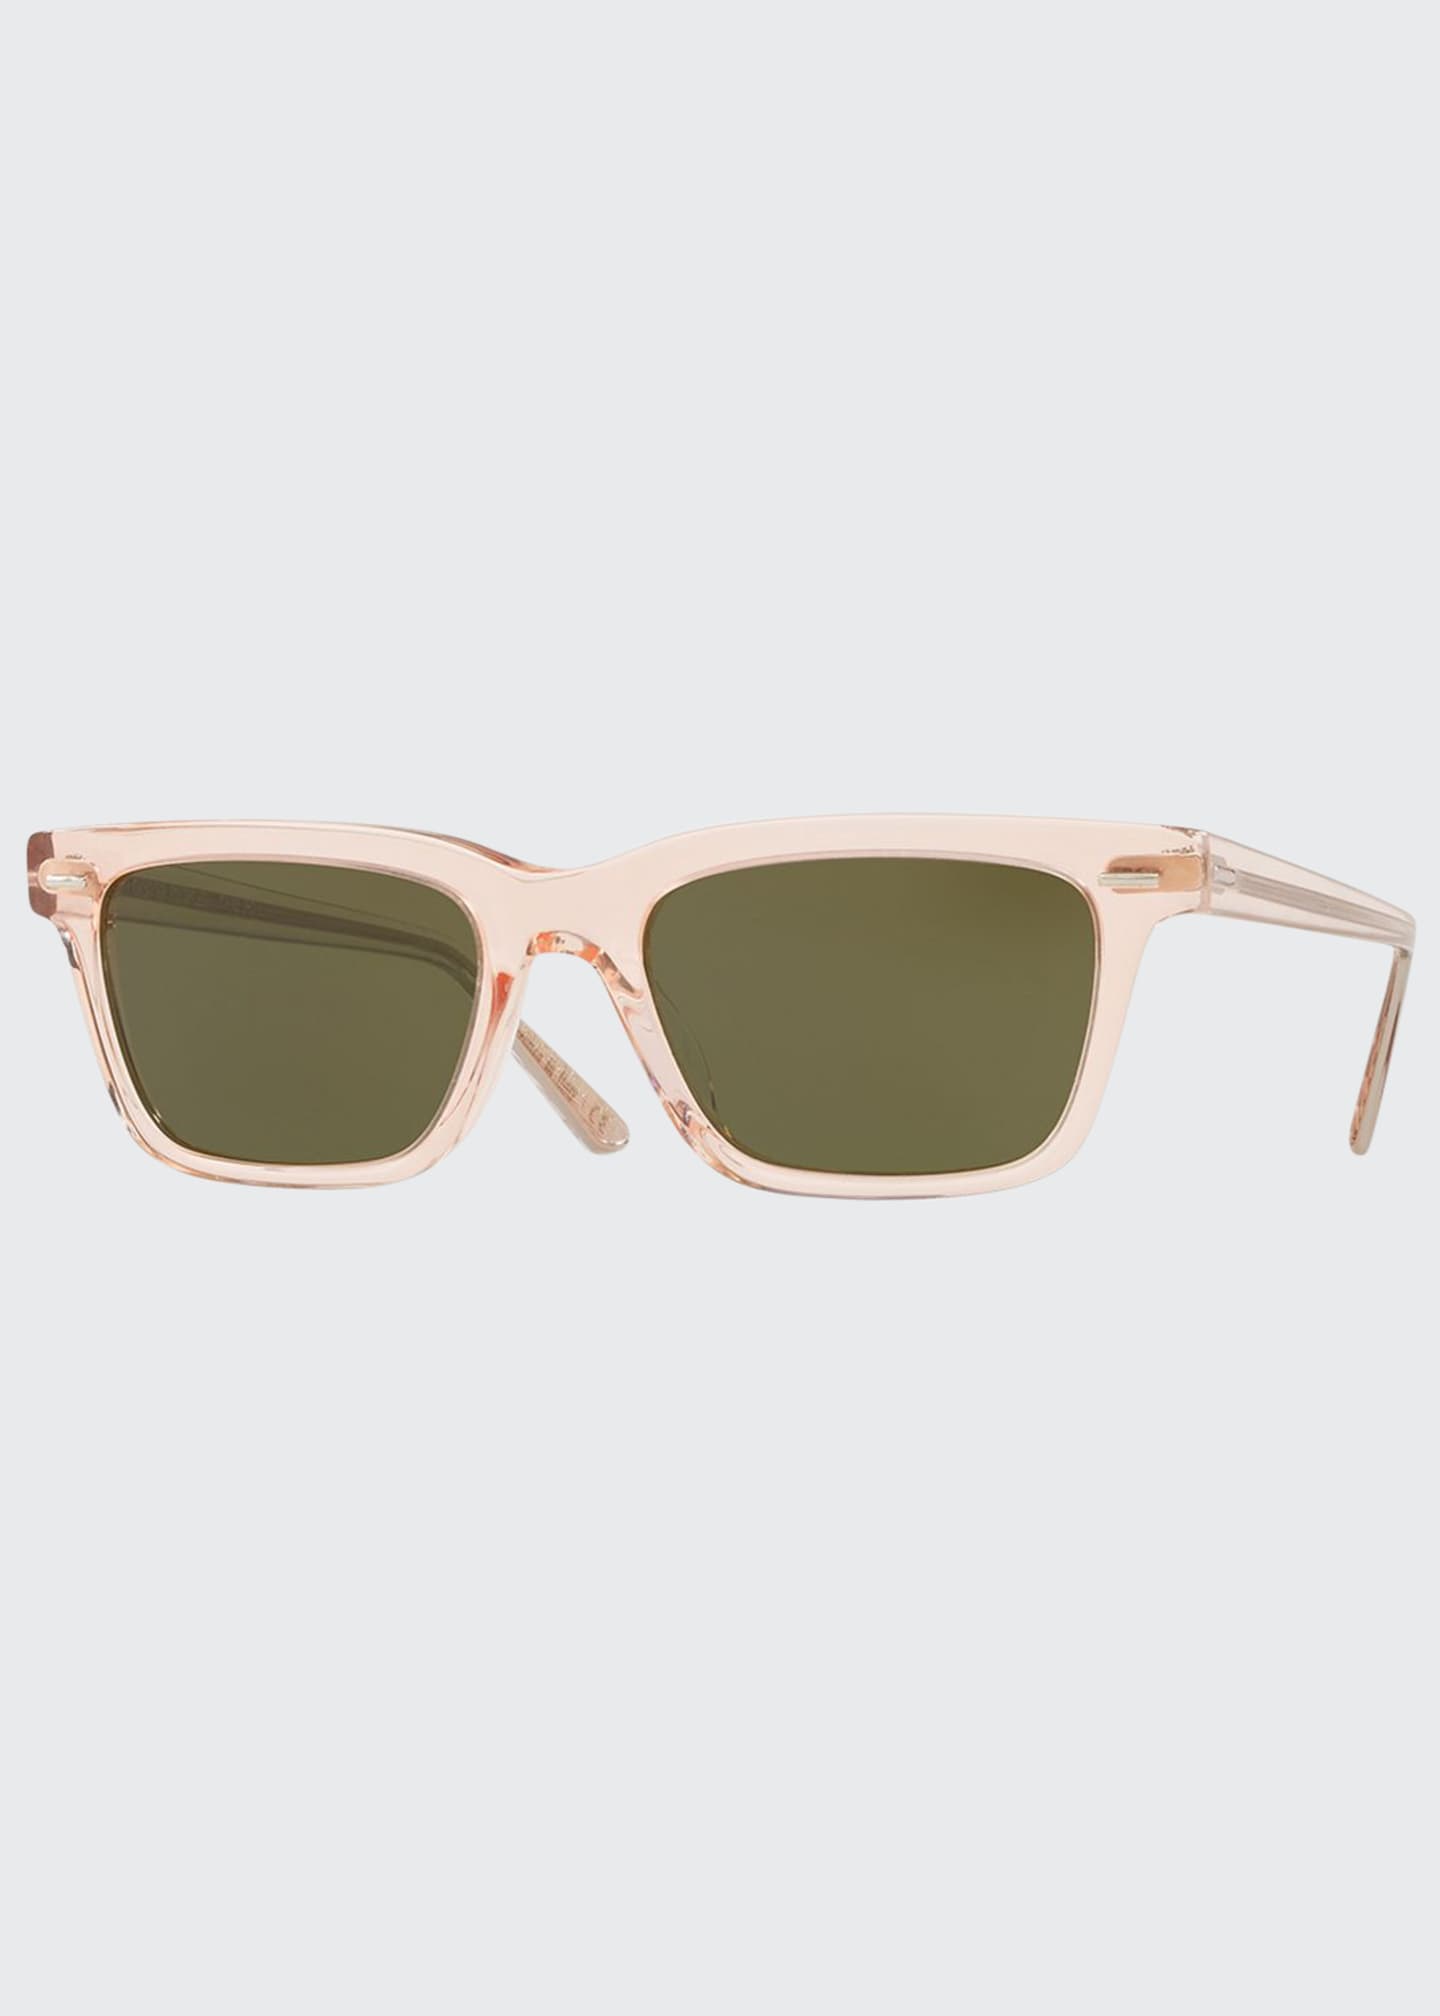 Oliver Peoples The Row